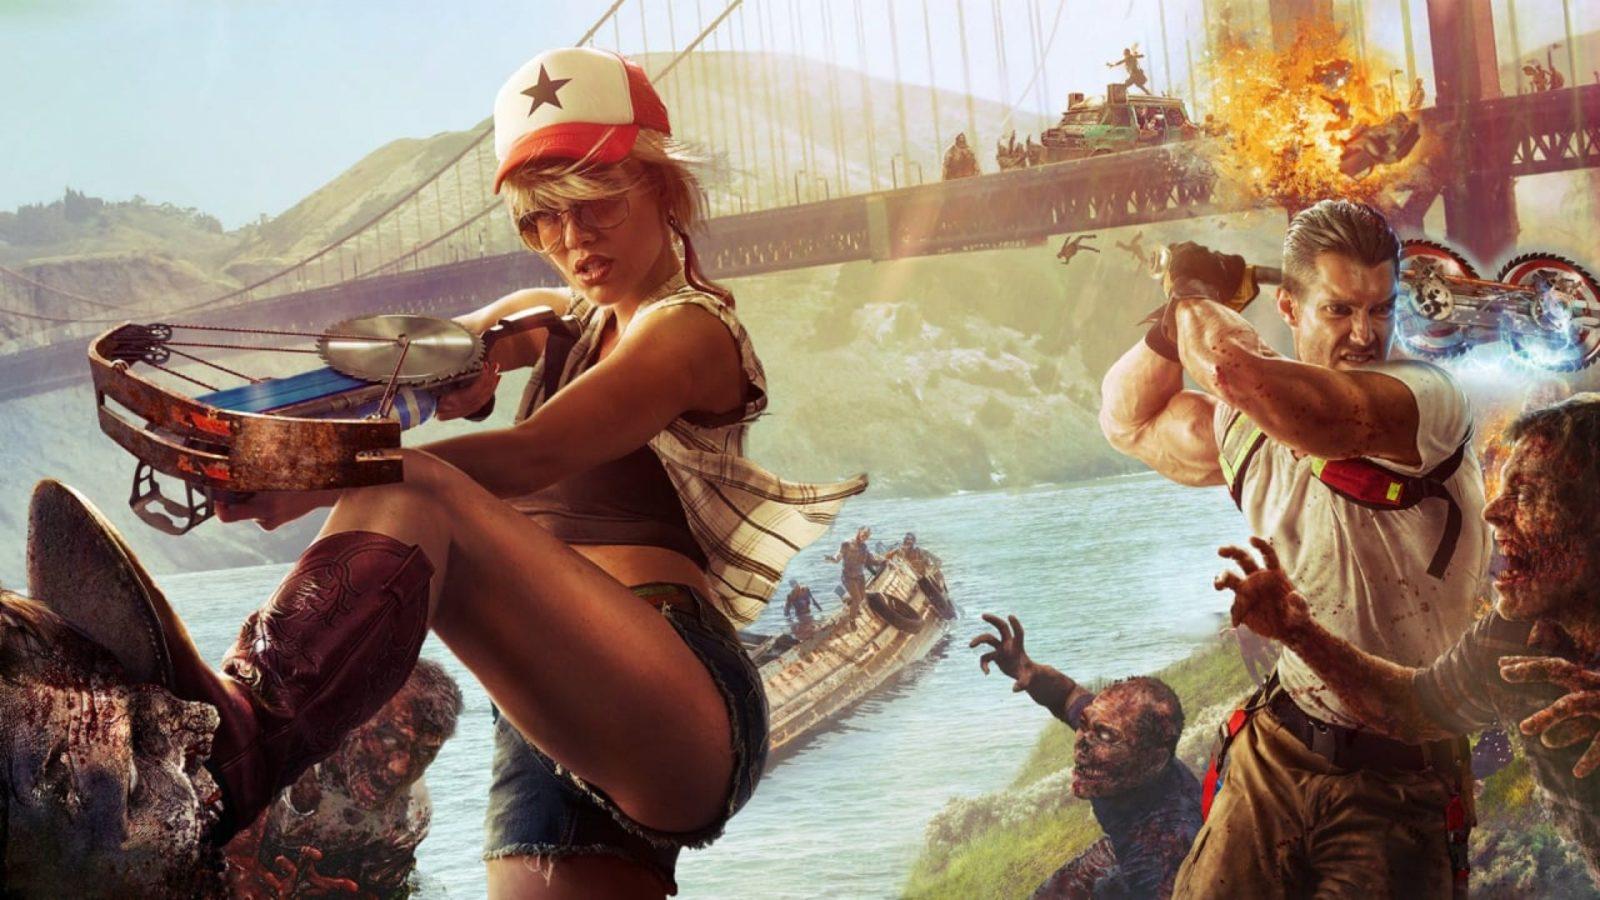 How Well Does Dead Island 2 Play On Steam Deck? 